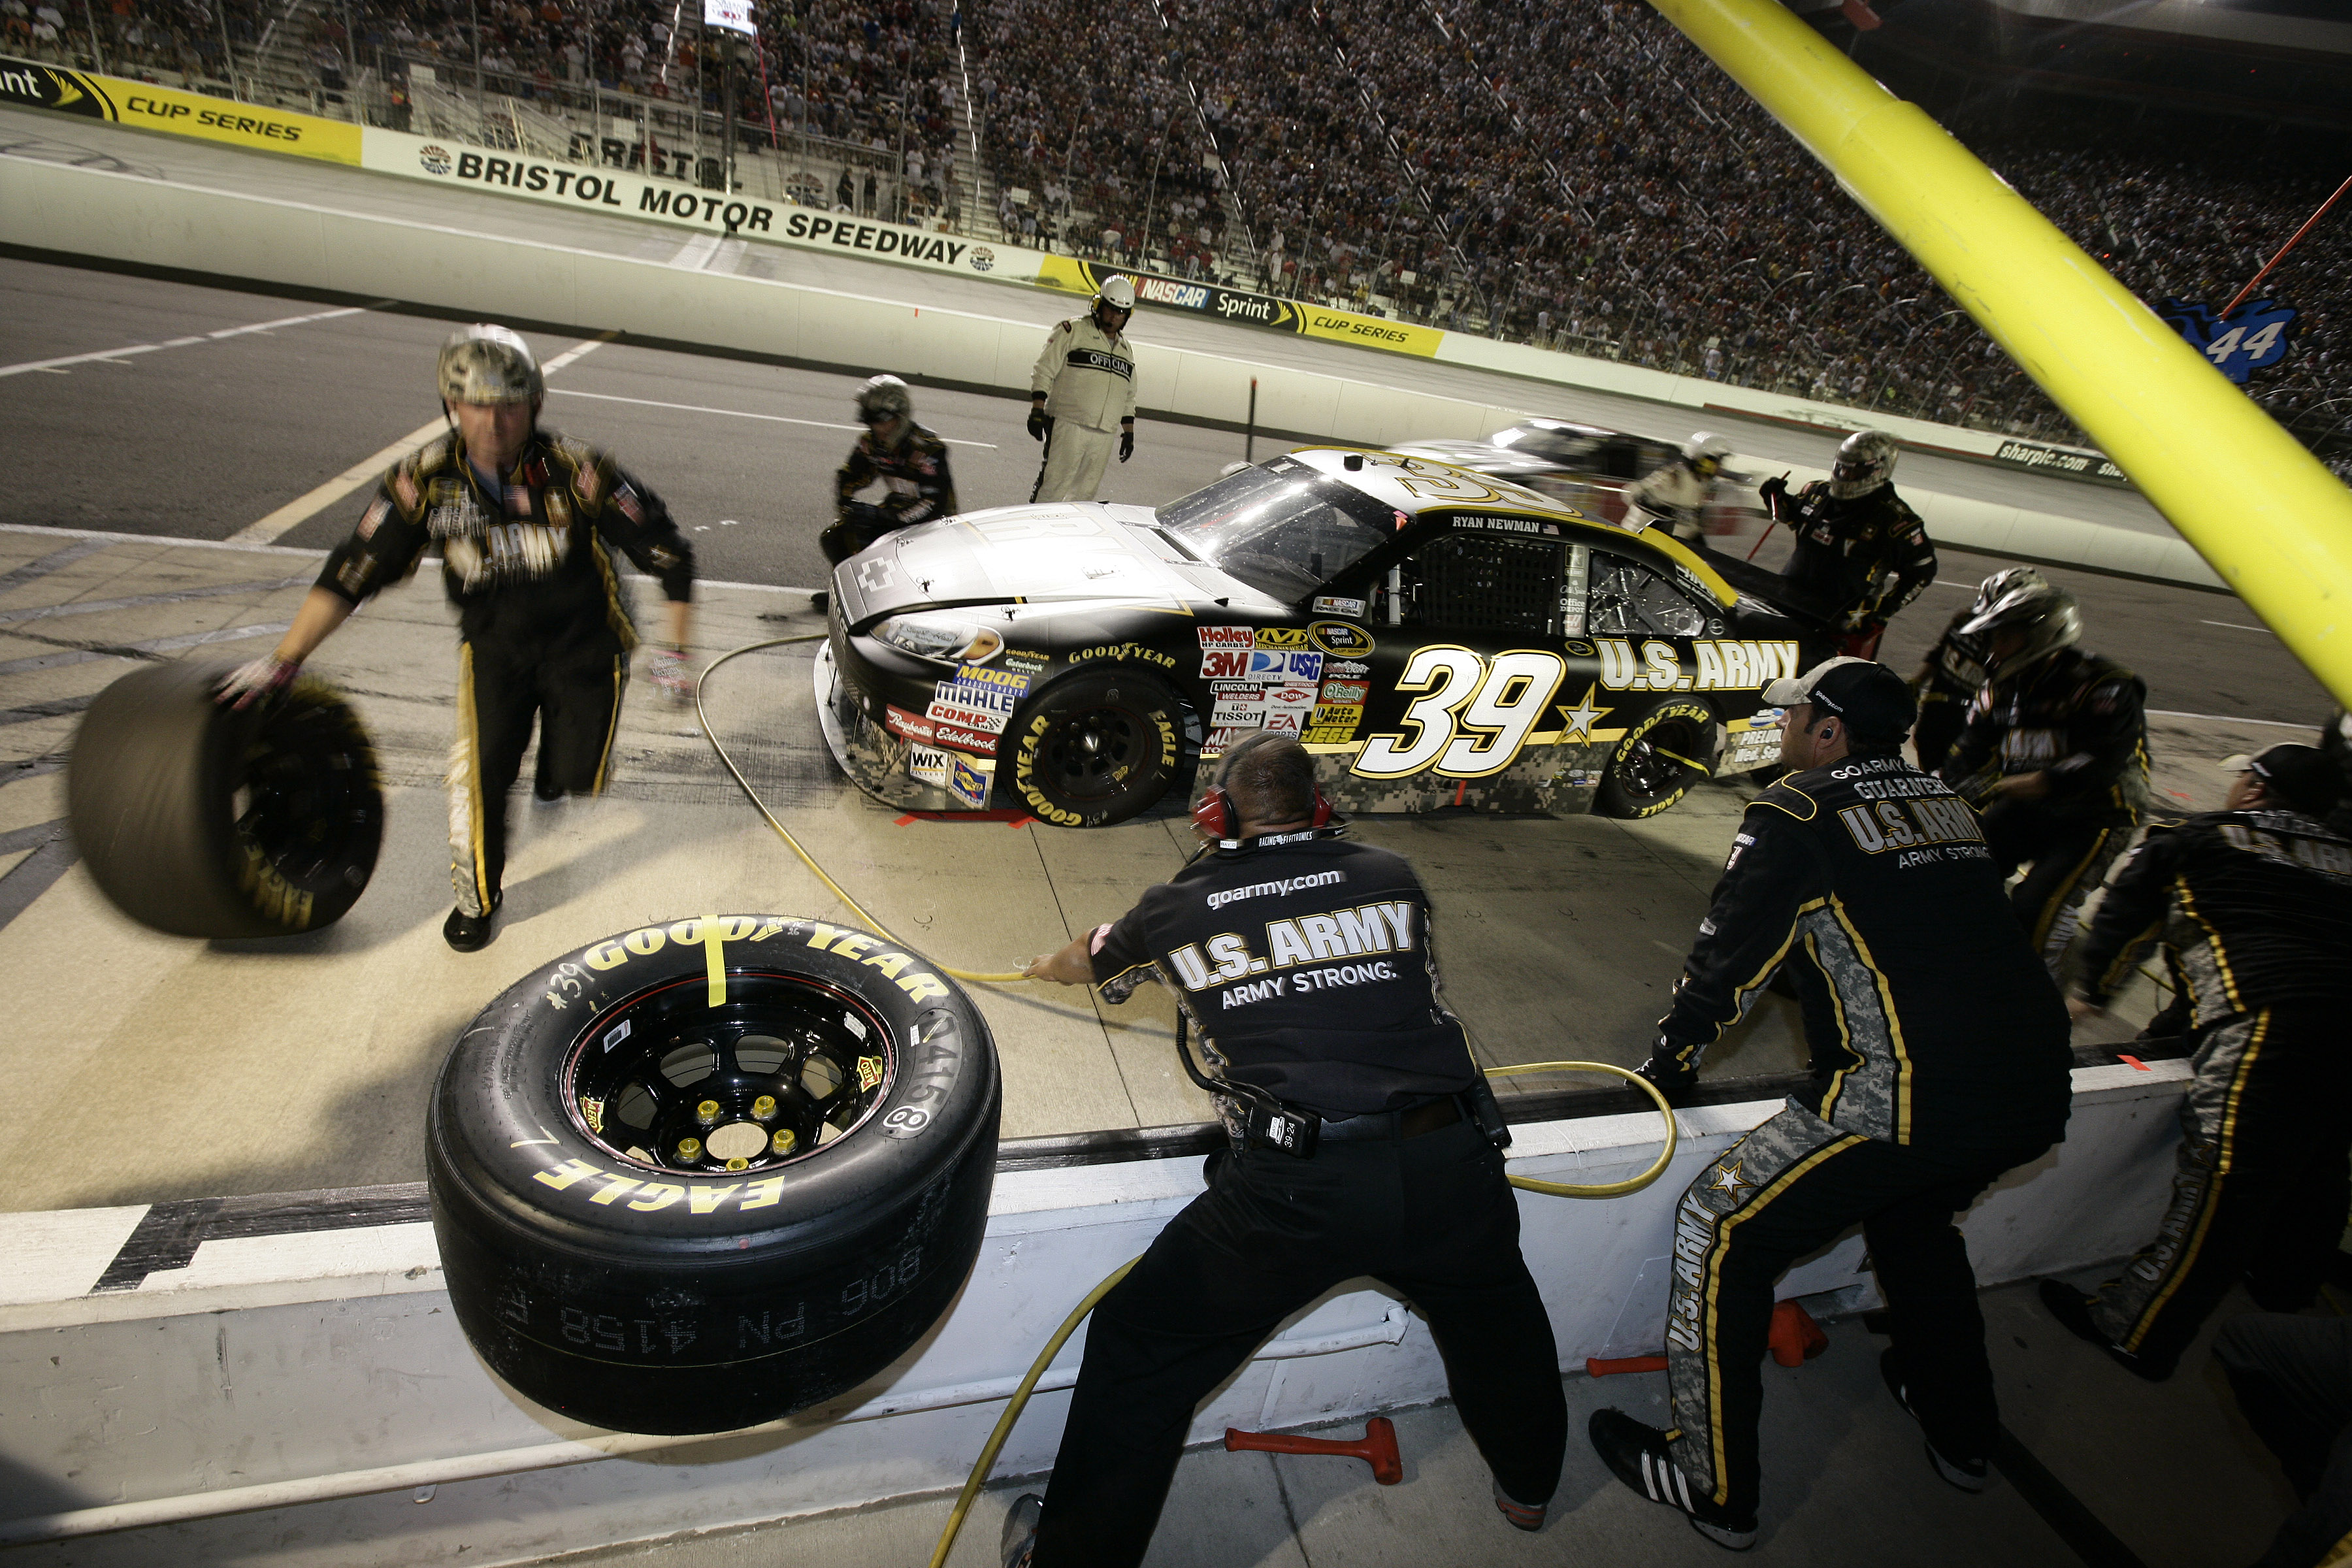 Flickr - The U.S. Army - Army Racing pit stop